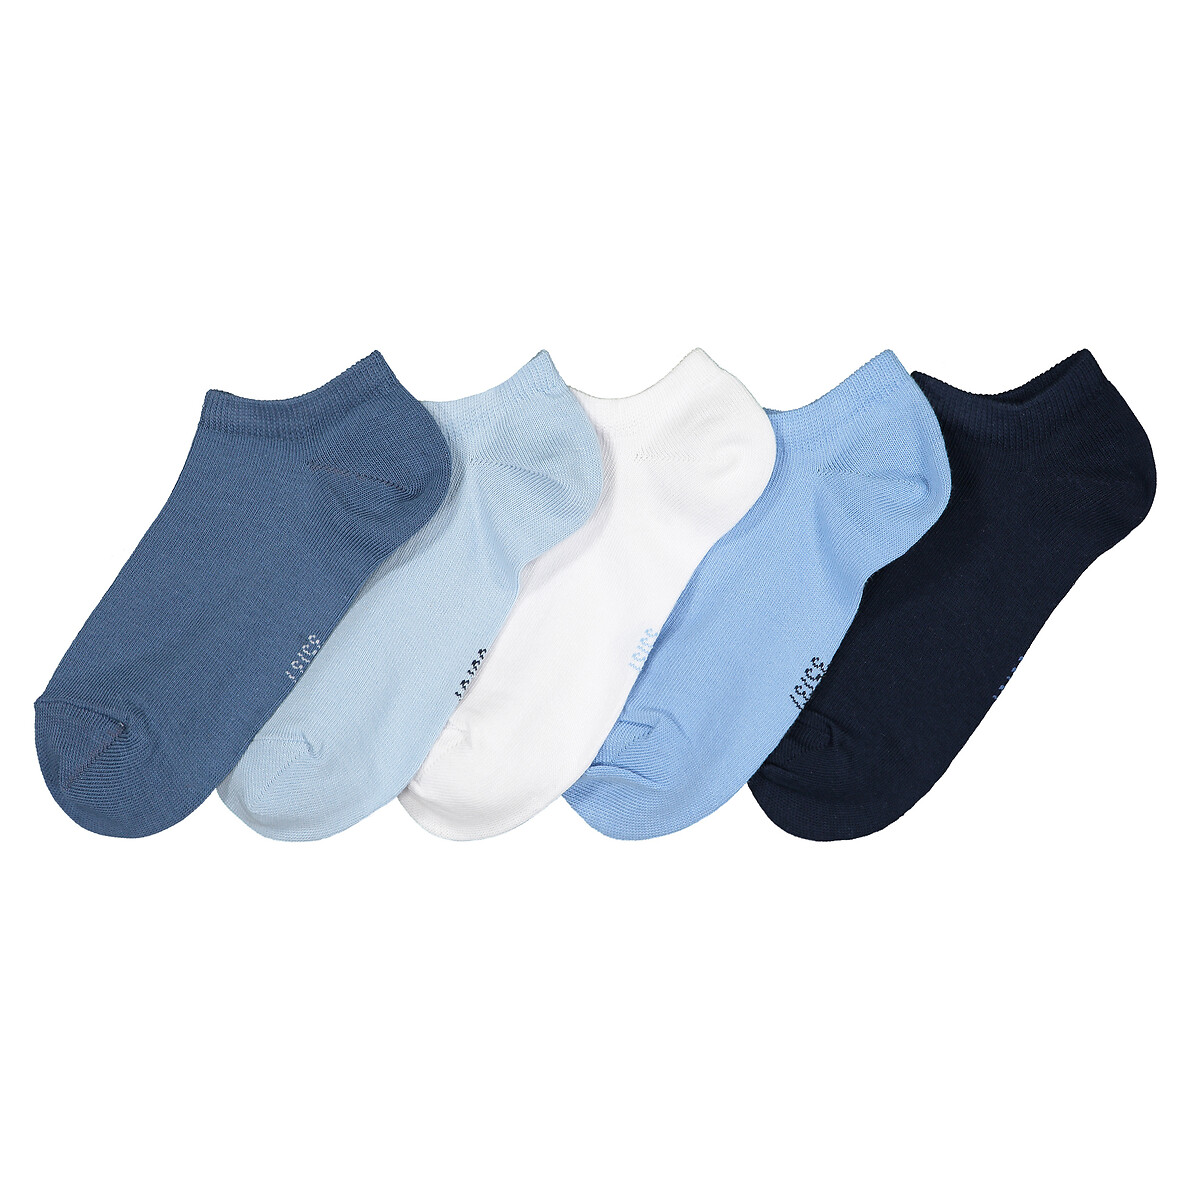 Lot 5 paires chaussettes blanches unies 